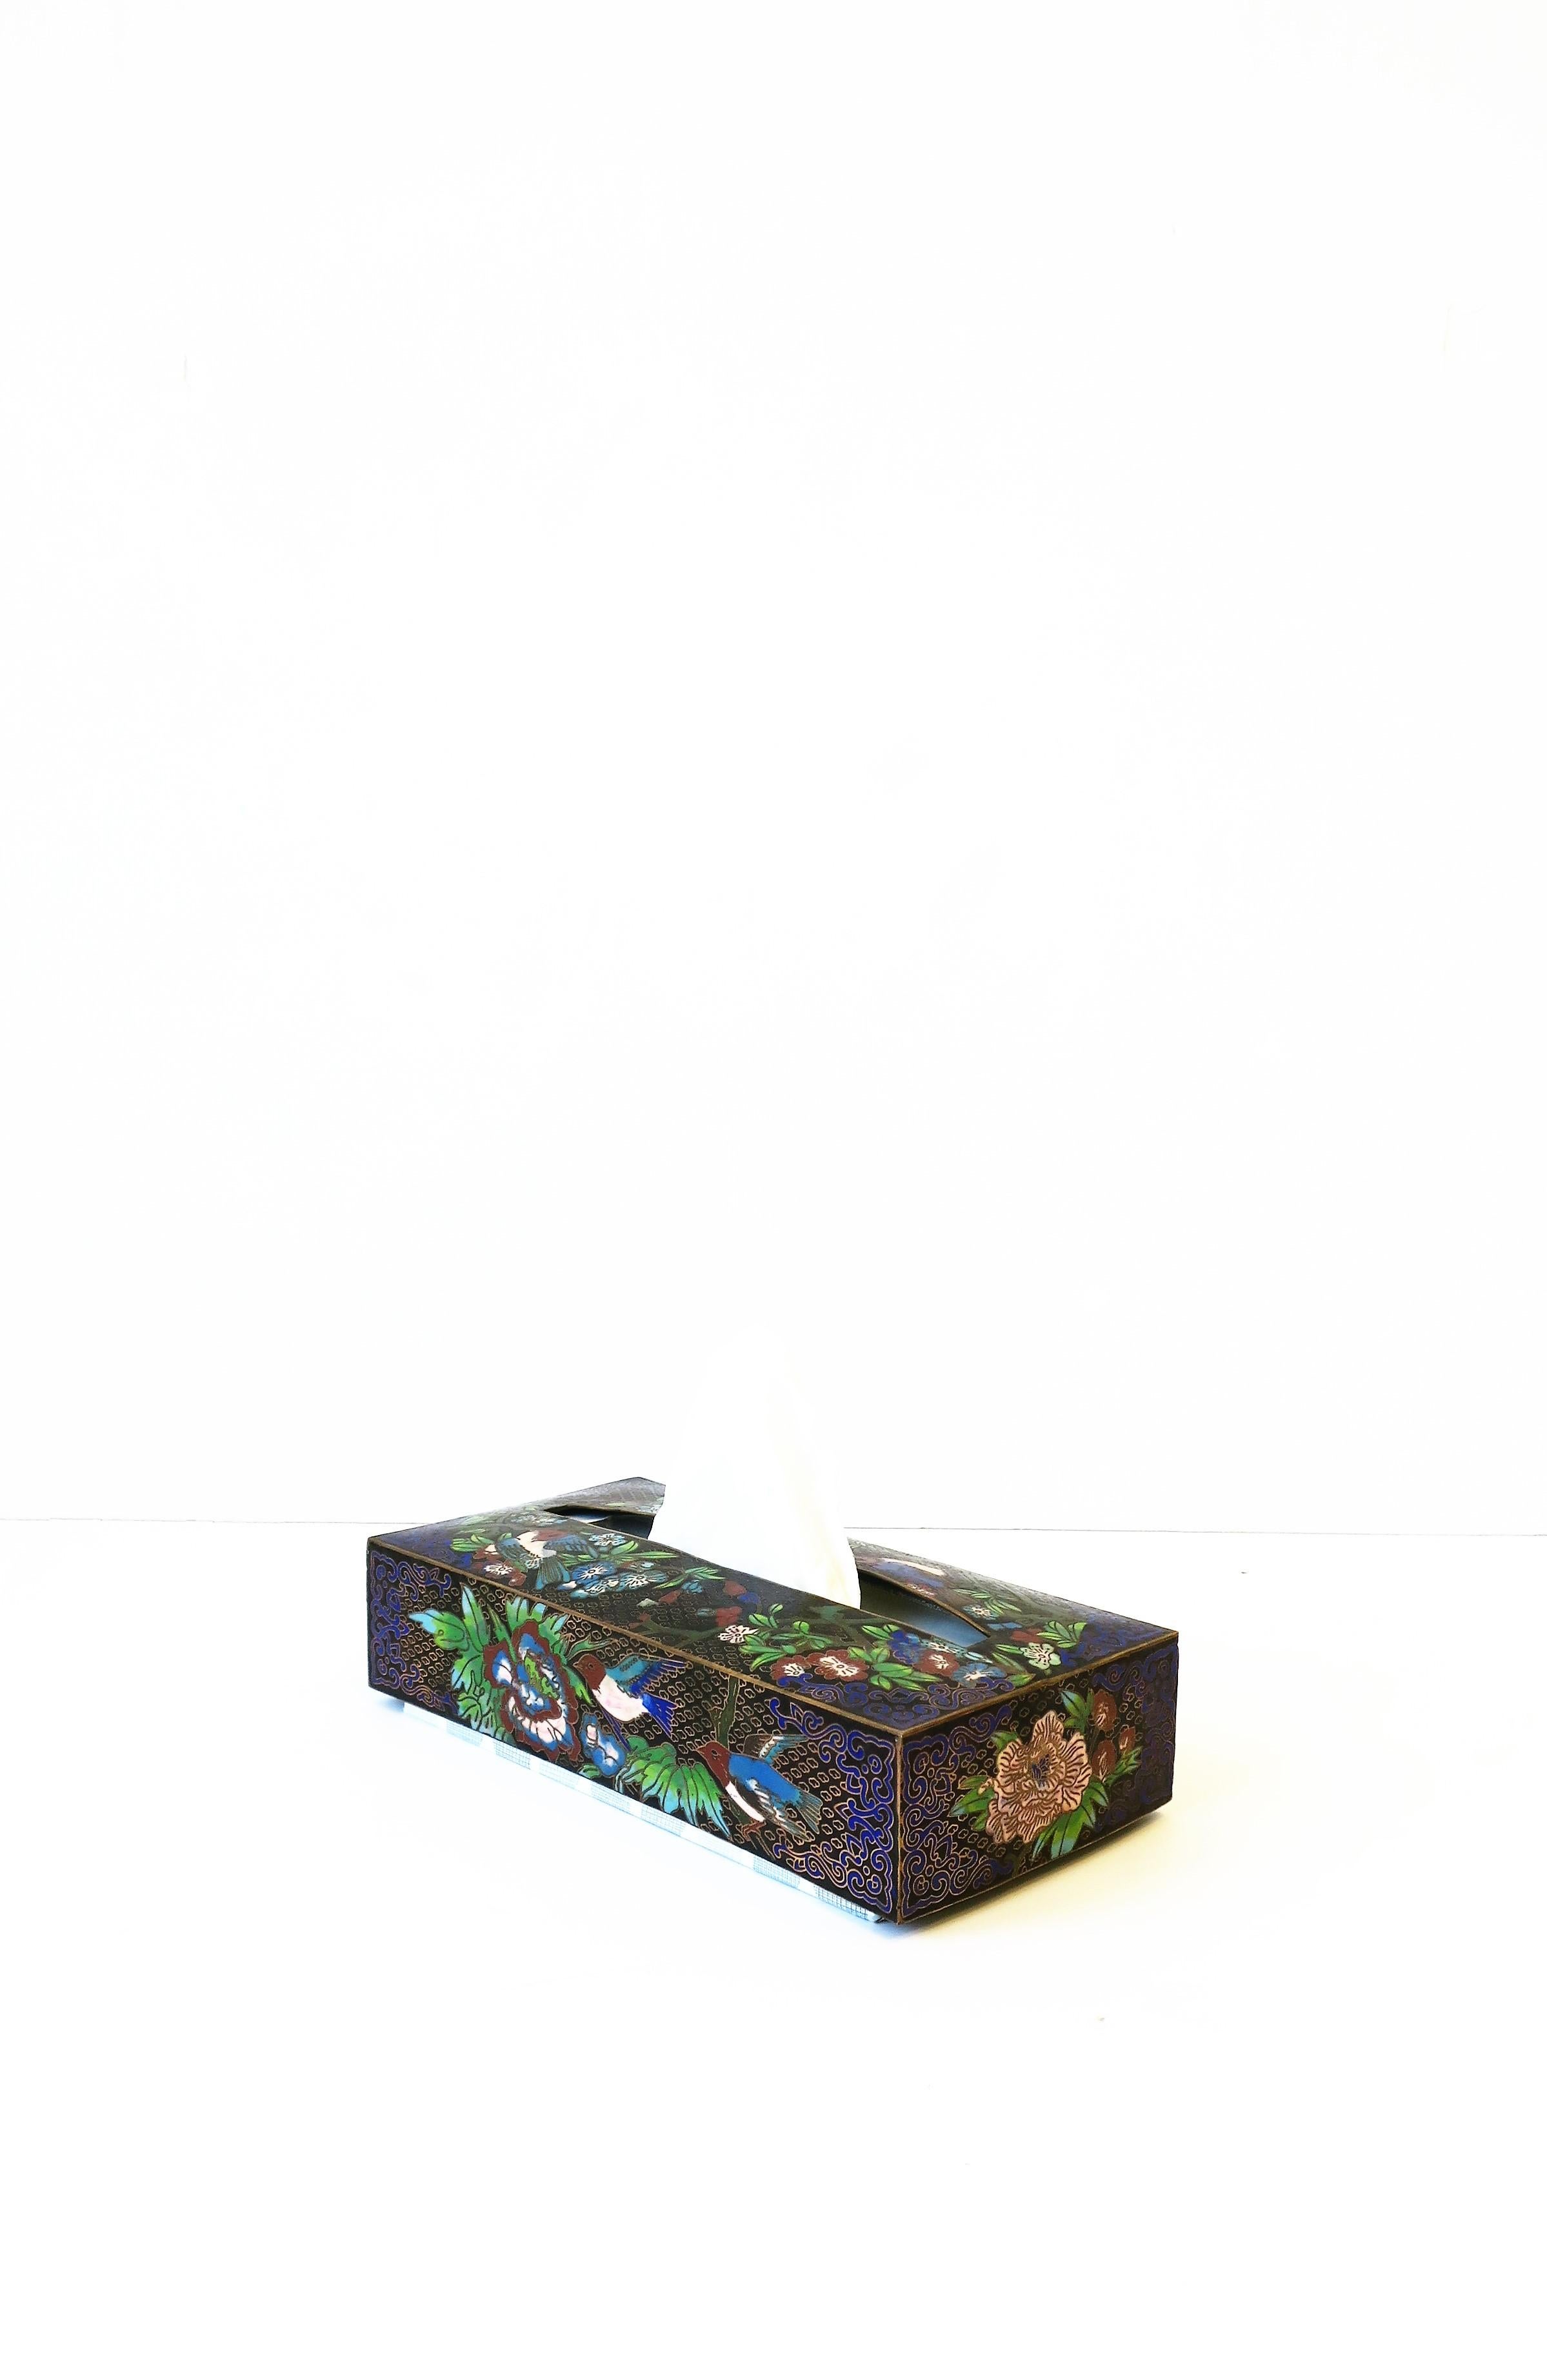 Brass and Cloisonné Enamel Tissue Box Holder Cover with Birds and Flowers 8